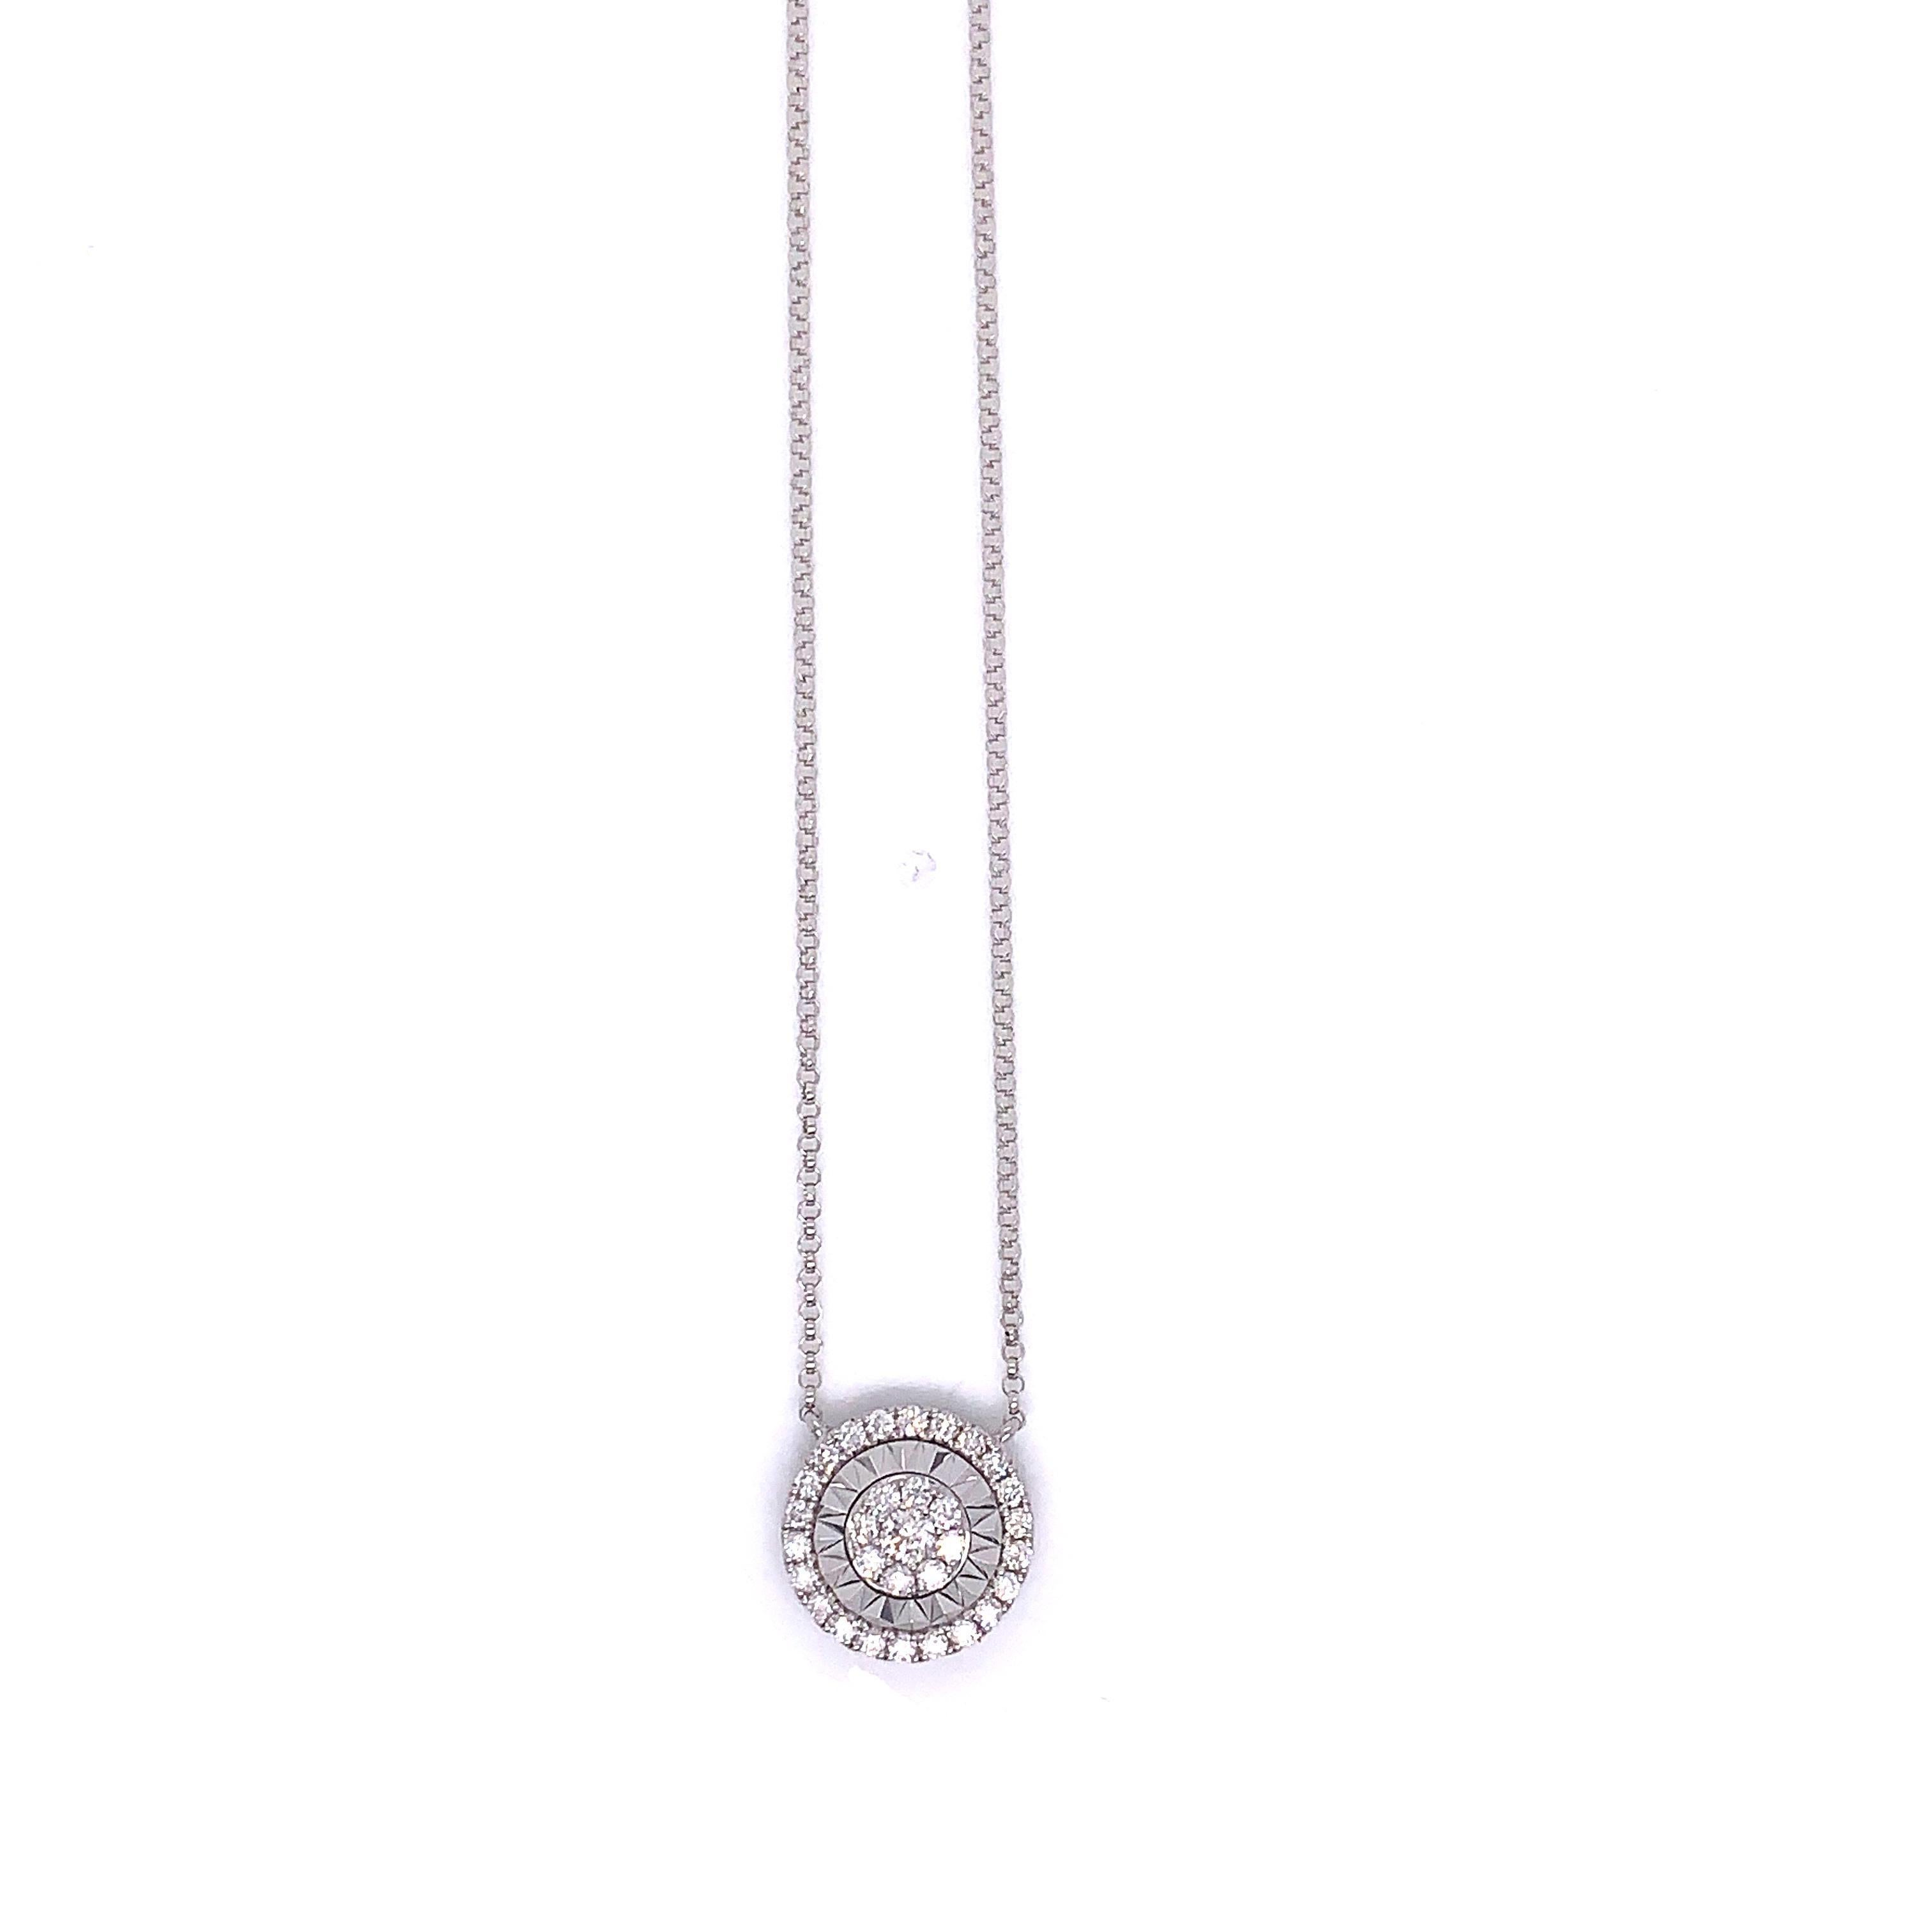 Give her a special gift she'll always treasure with this dazzling 0.40 carat diamond cluster pendant necklace. The gorgeous design features sparkling round cut white diamonds and 18k white gold. In the back there is a movable clasp that glides down